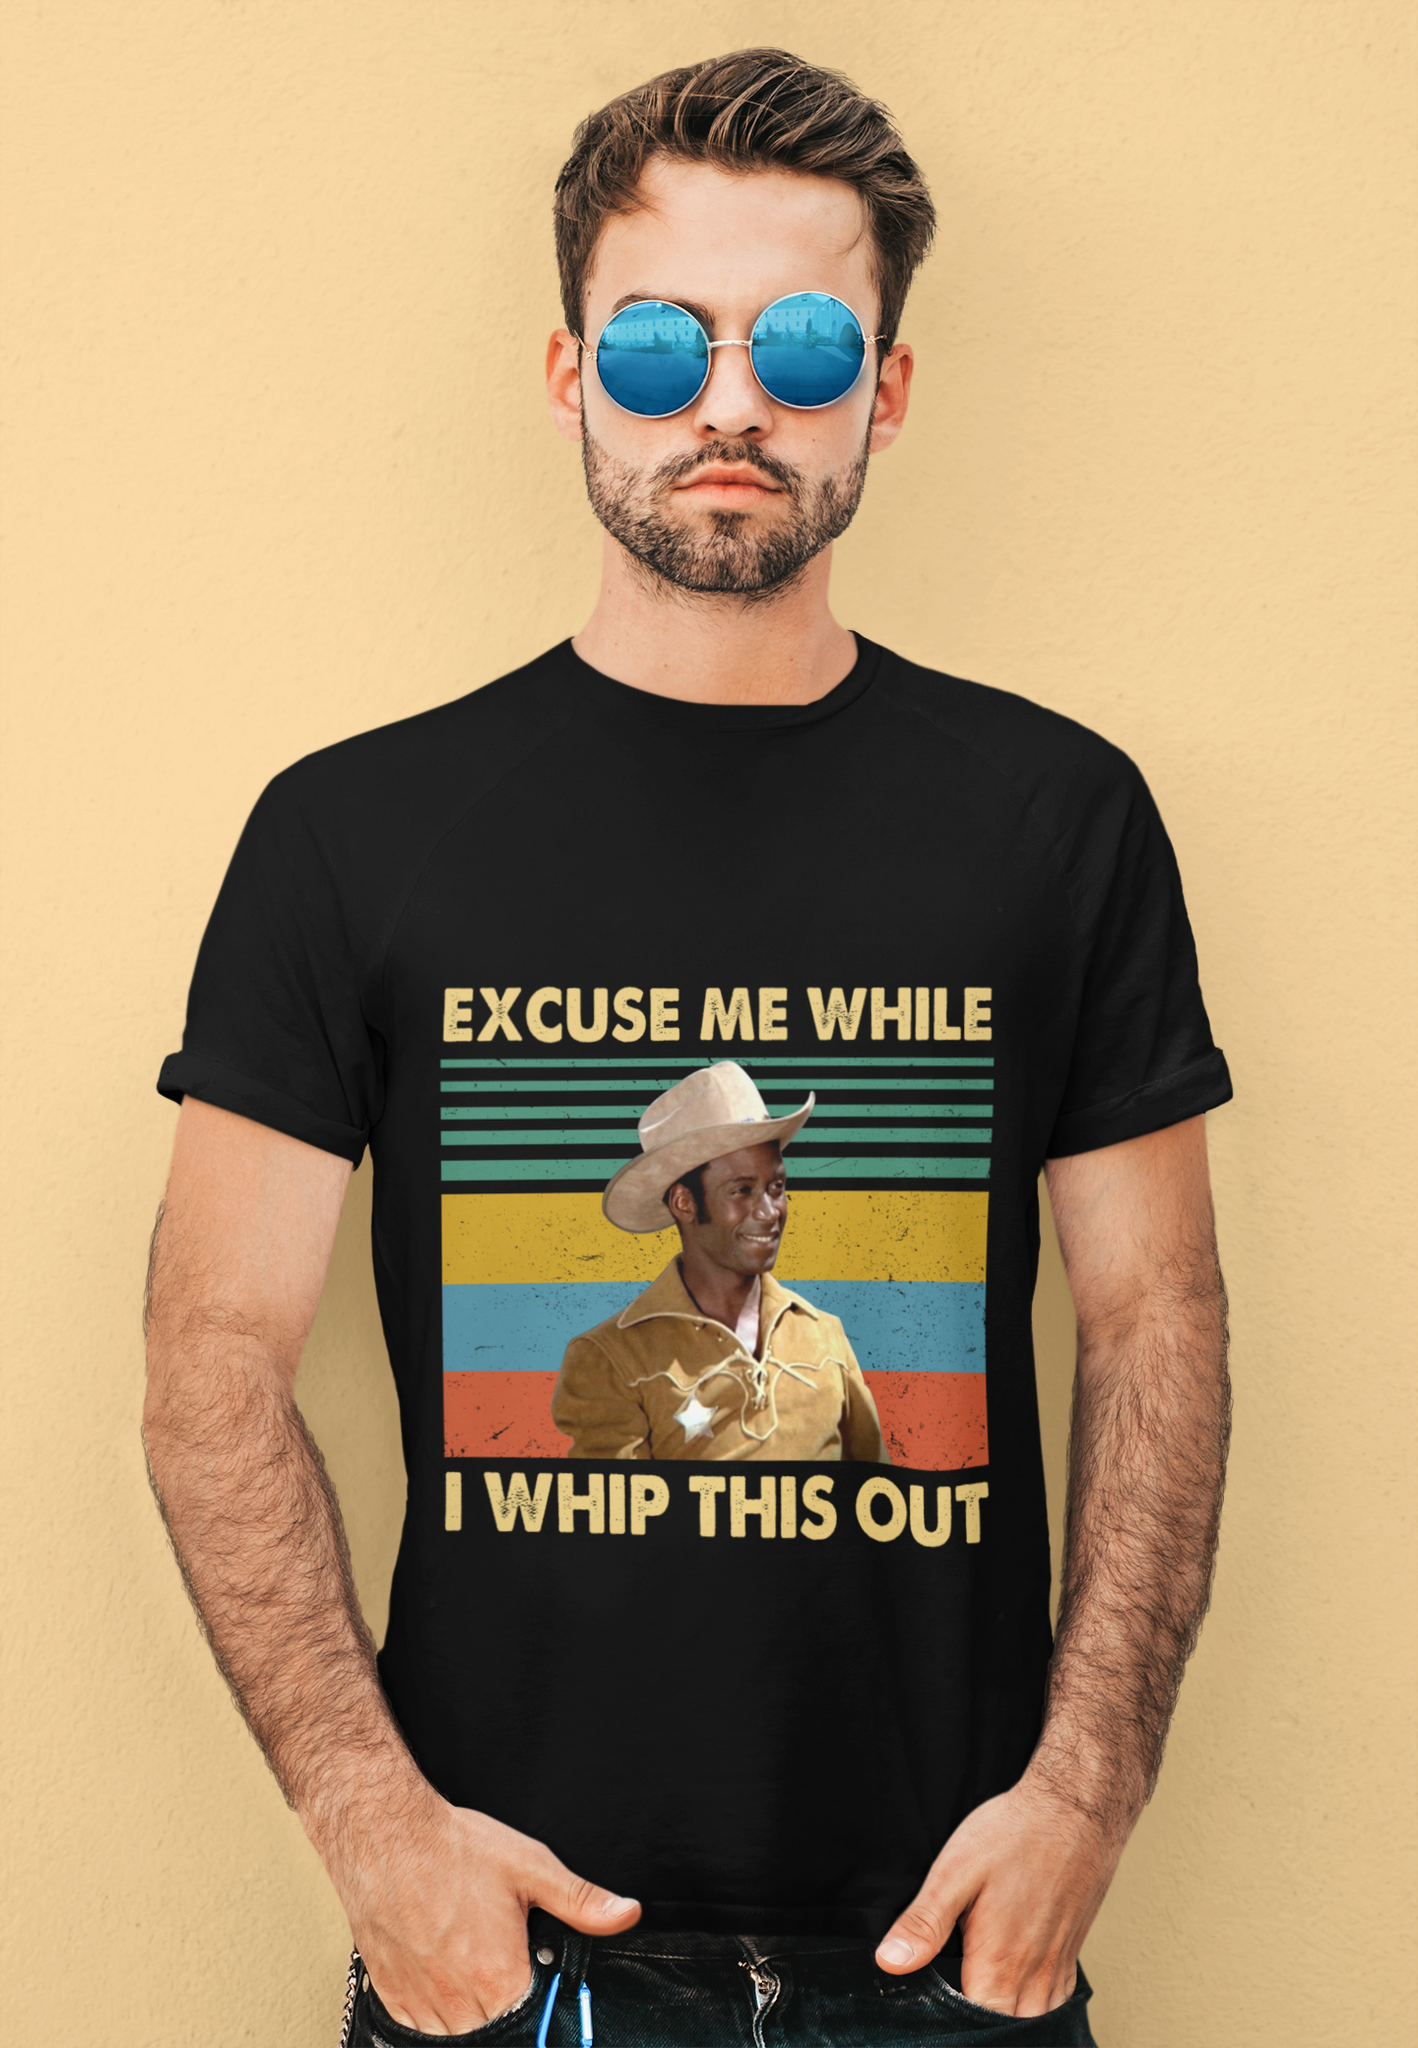 Blazing Saddles Vintage T Shirt, Excuse Me While I Whip This Out T Shirt, Bart Tshirt